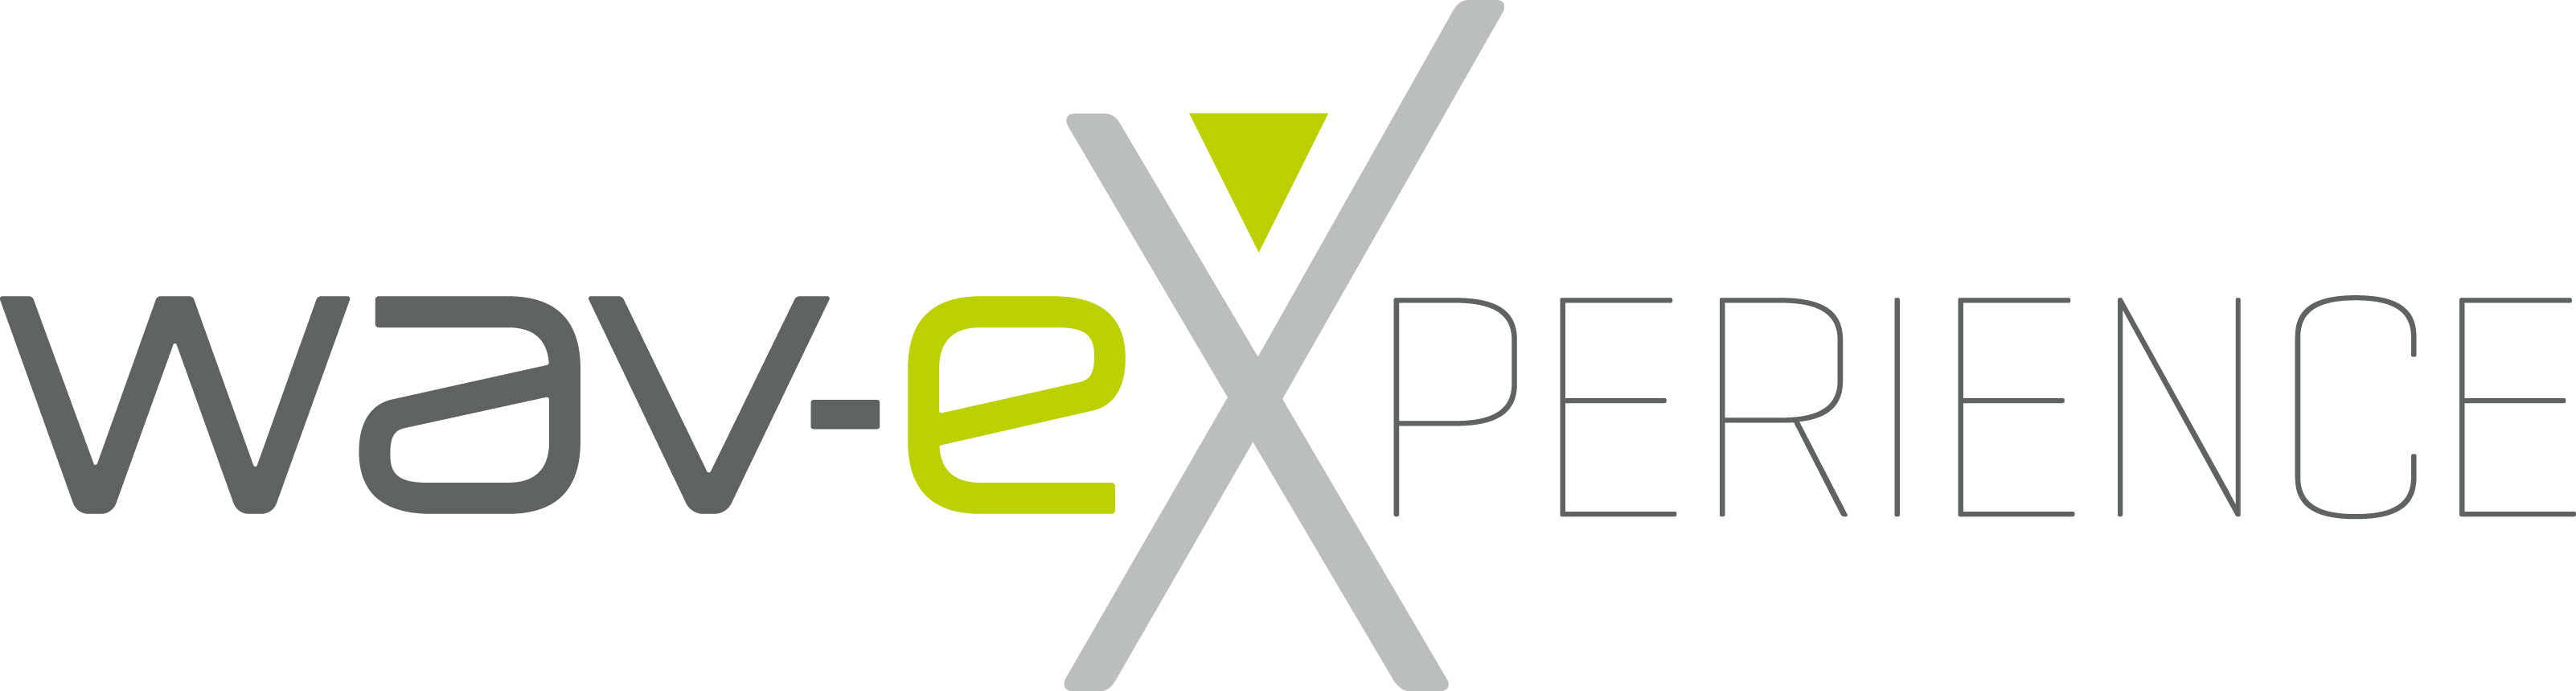 Xperience Logo - Contact Us For All Your Questions. Wav E. The Future Of Fitness